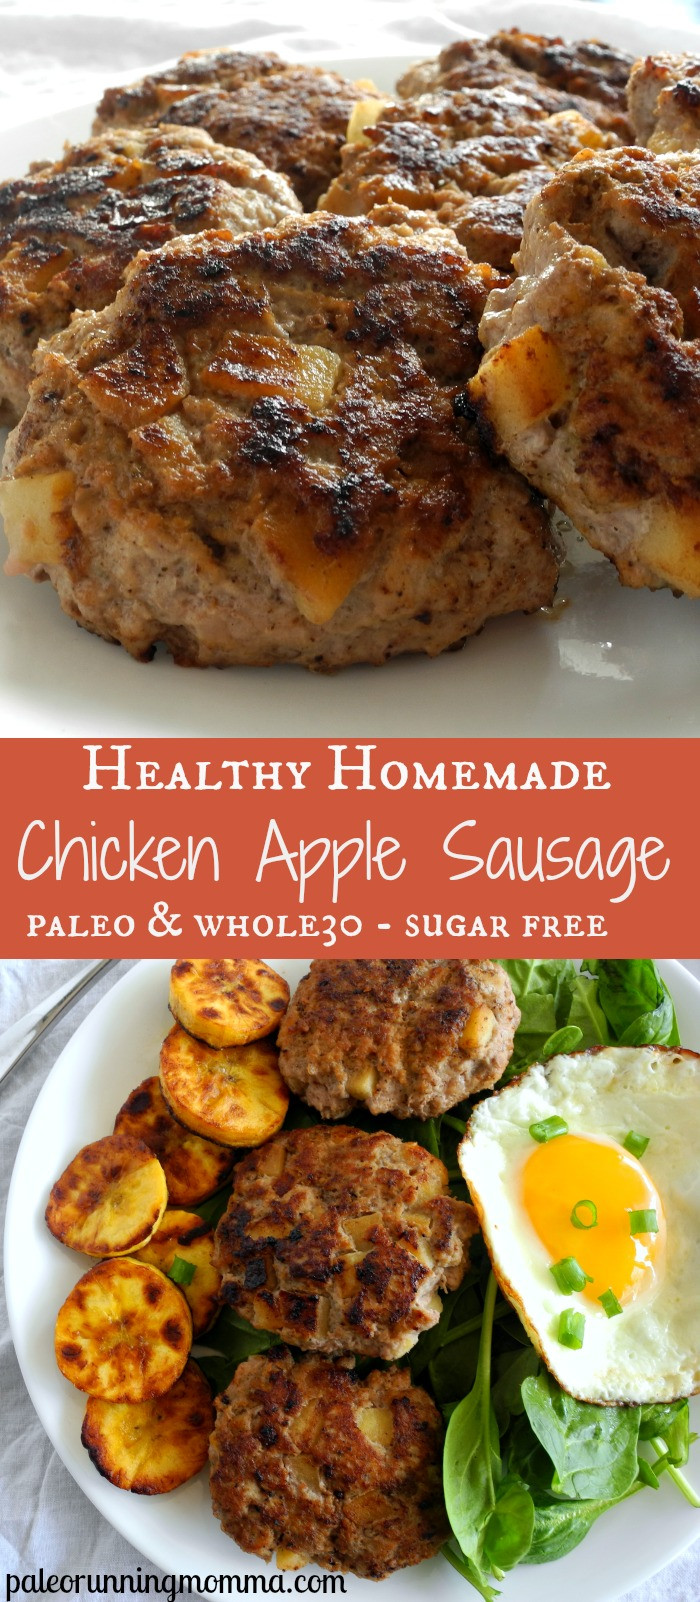 Healthy Chicken Sausage Recipes
 Easy Homemade Chicken Apple Sausage Paleo & Whole30